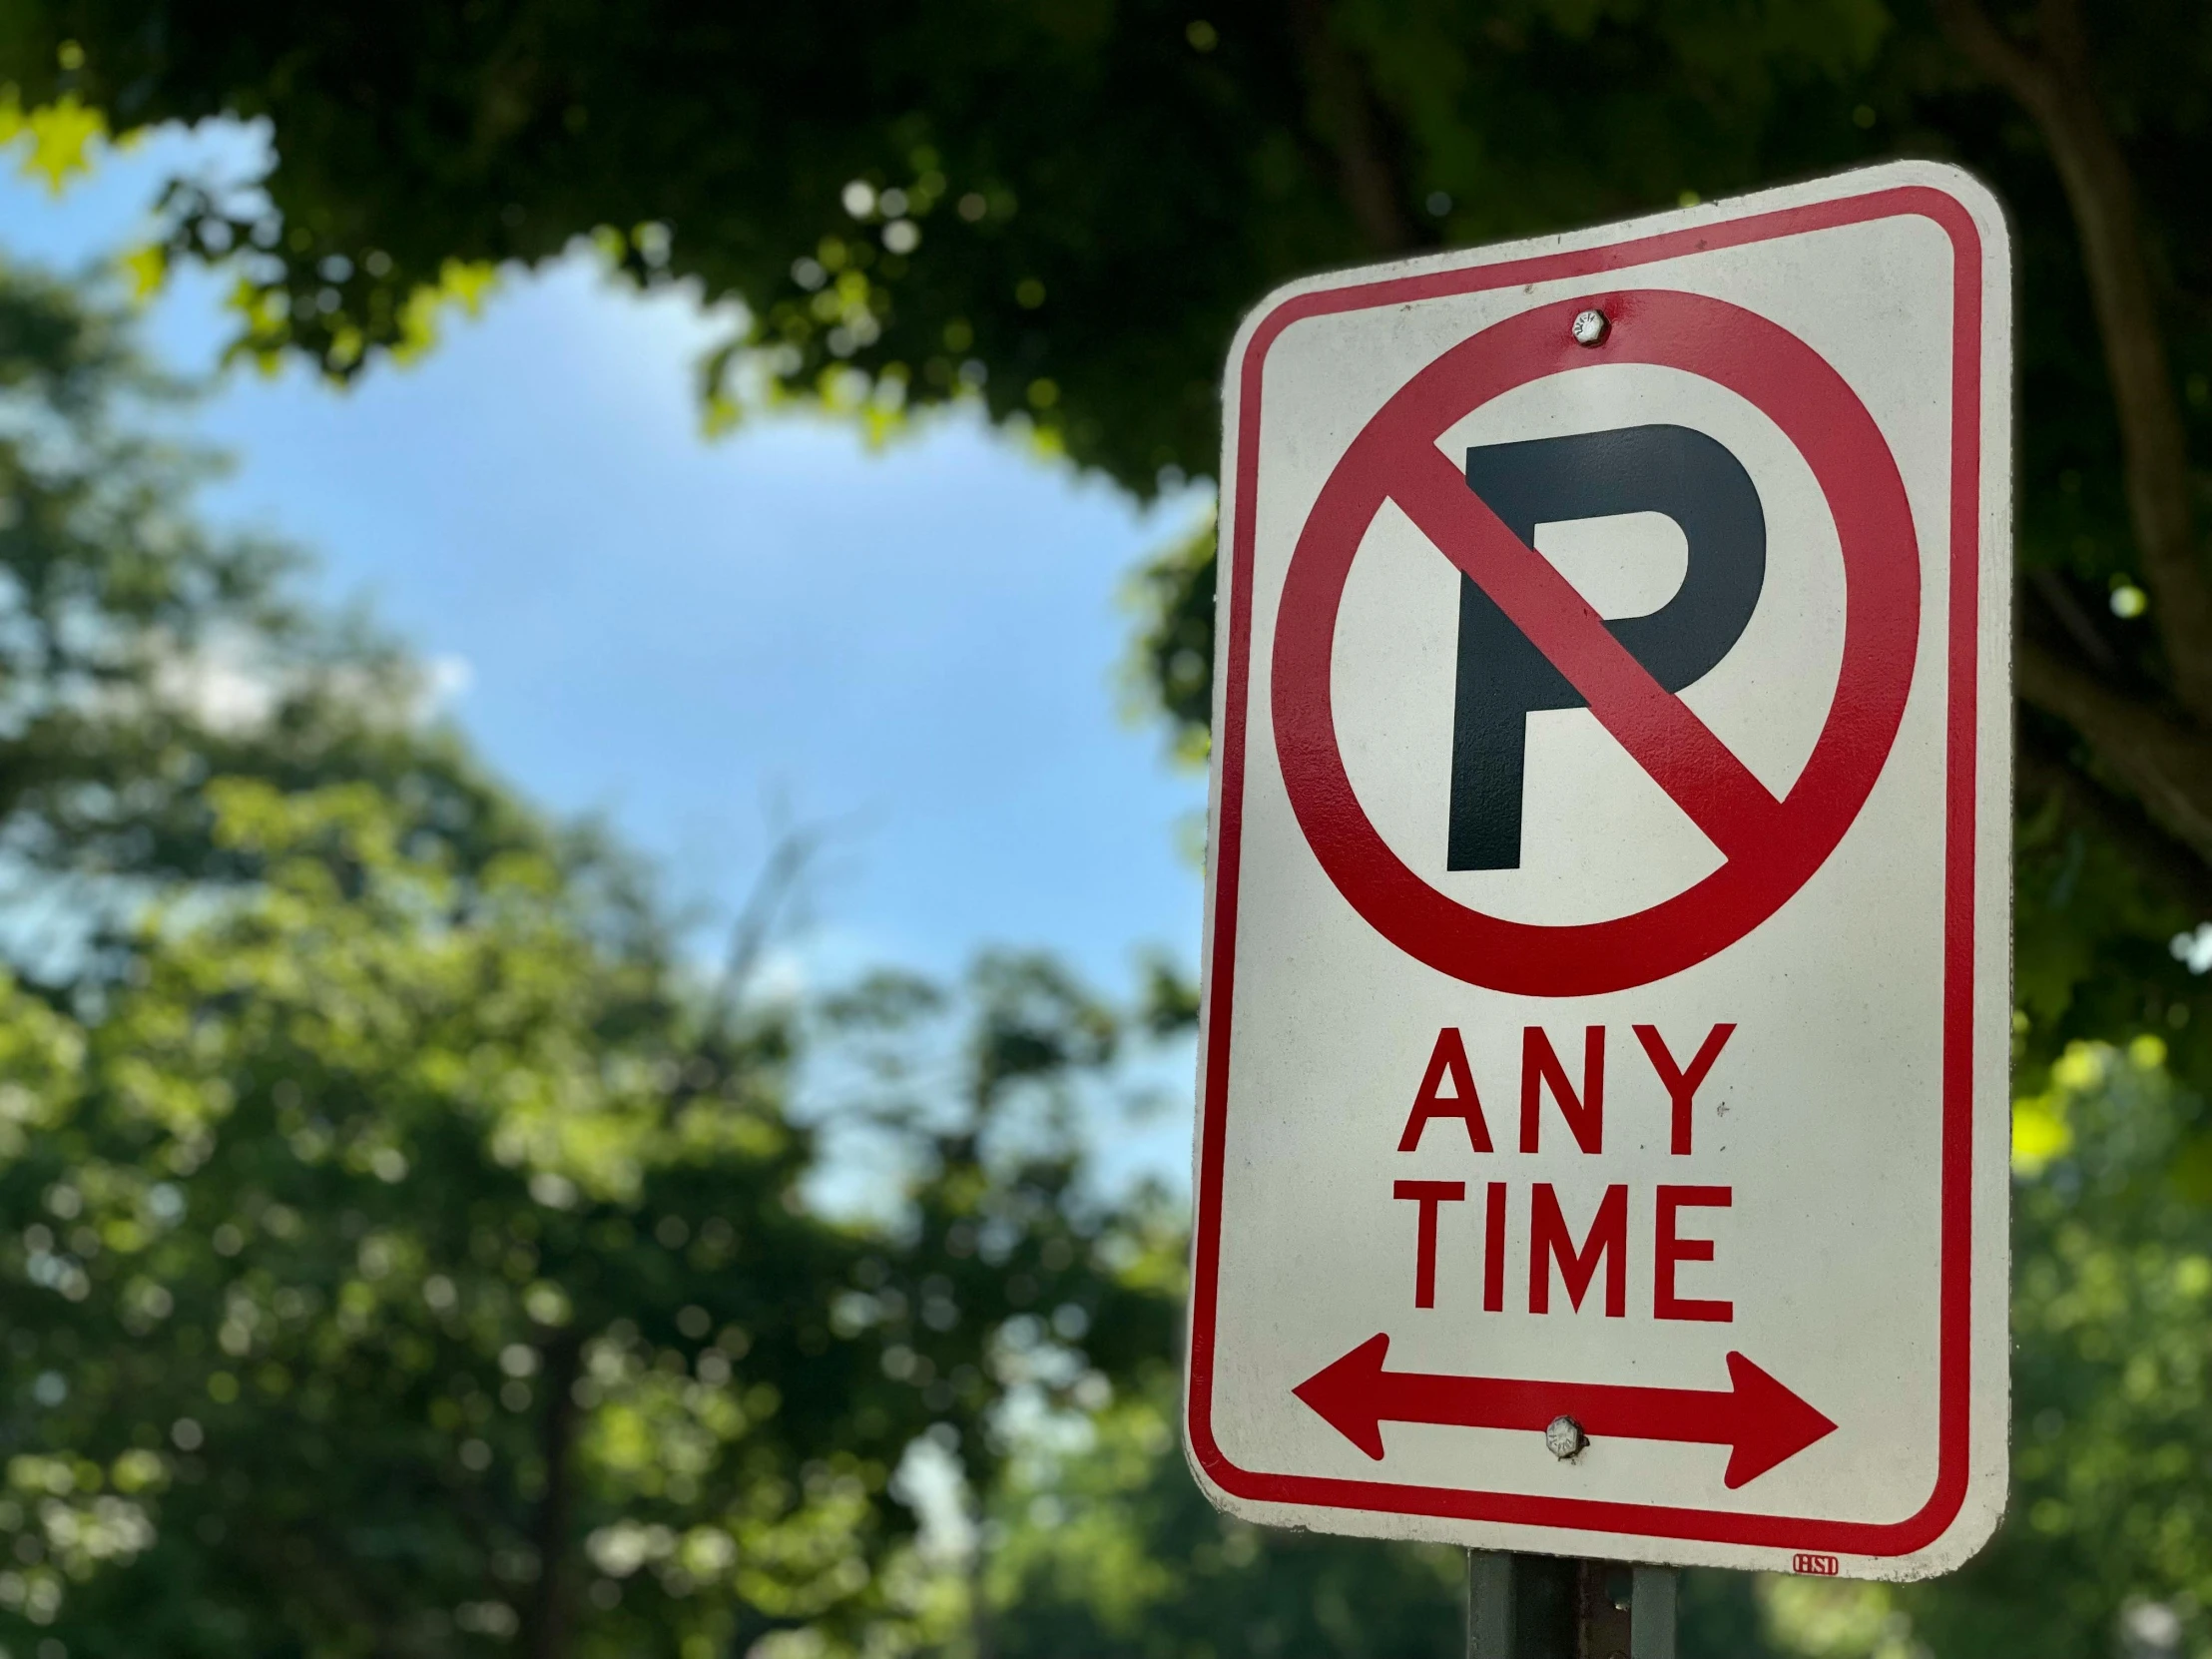 a no parking sign in front of a tree, by Bernie D’Andrea, pexels, auto-destructive art, square, afternoon time, intersection, 4 k -